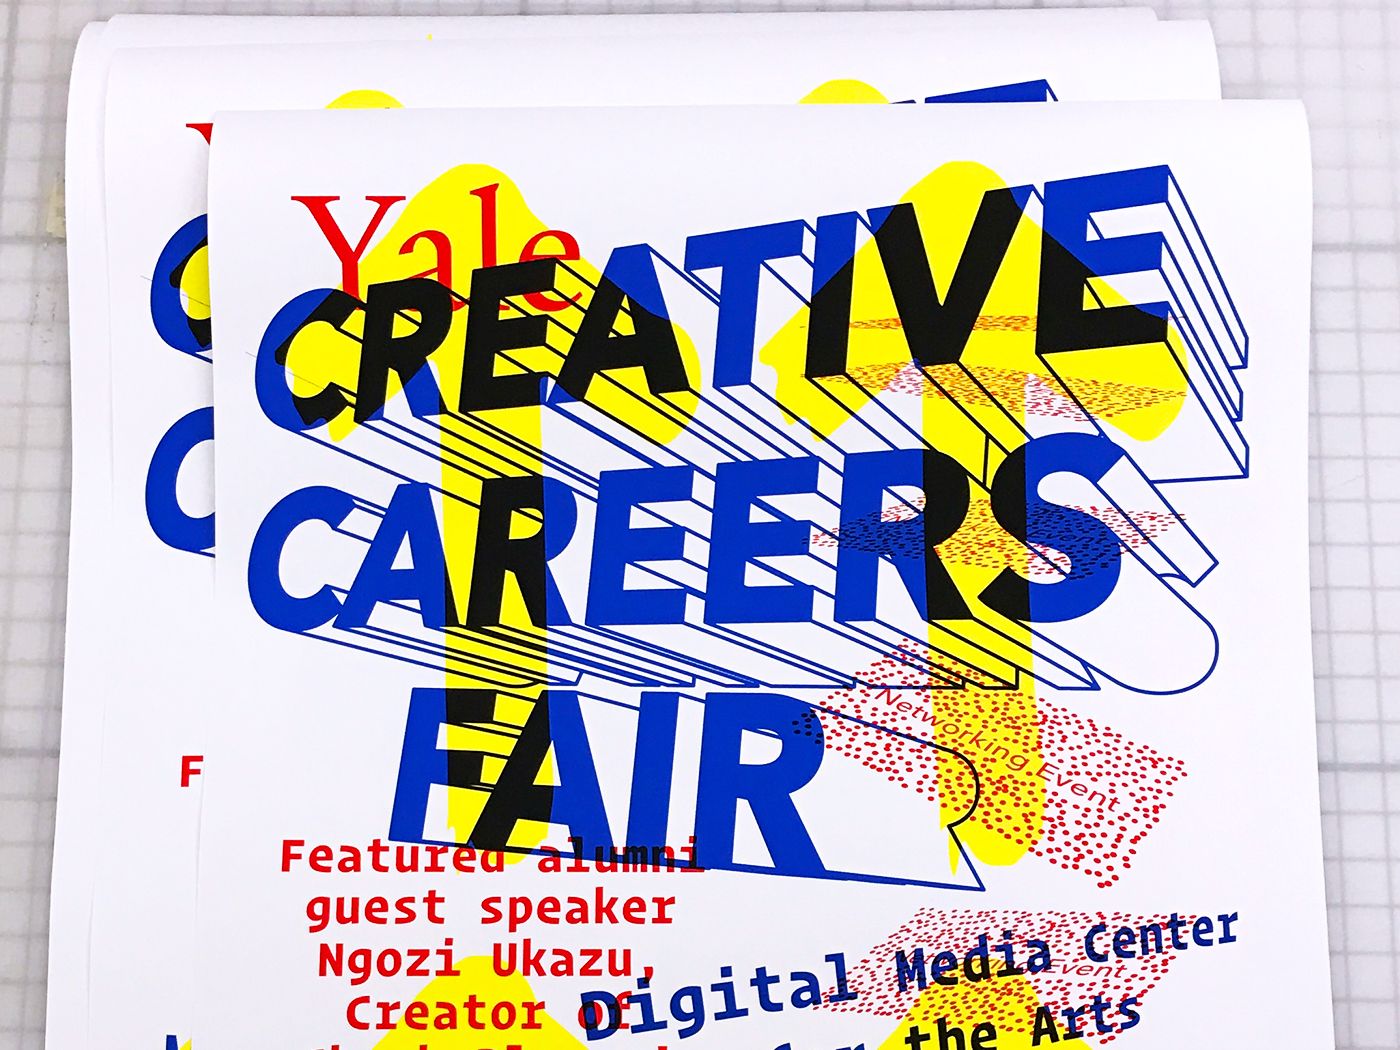 Printout of poster for Yale Creative Careers Fair by Isaac Morrier